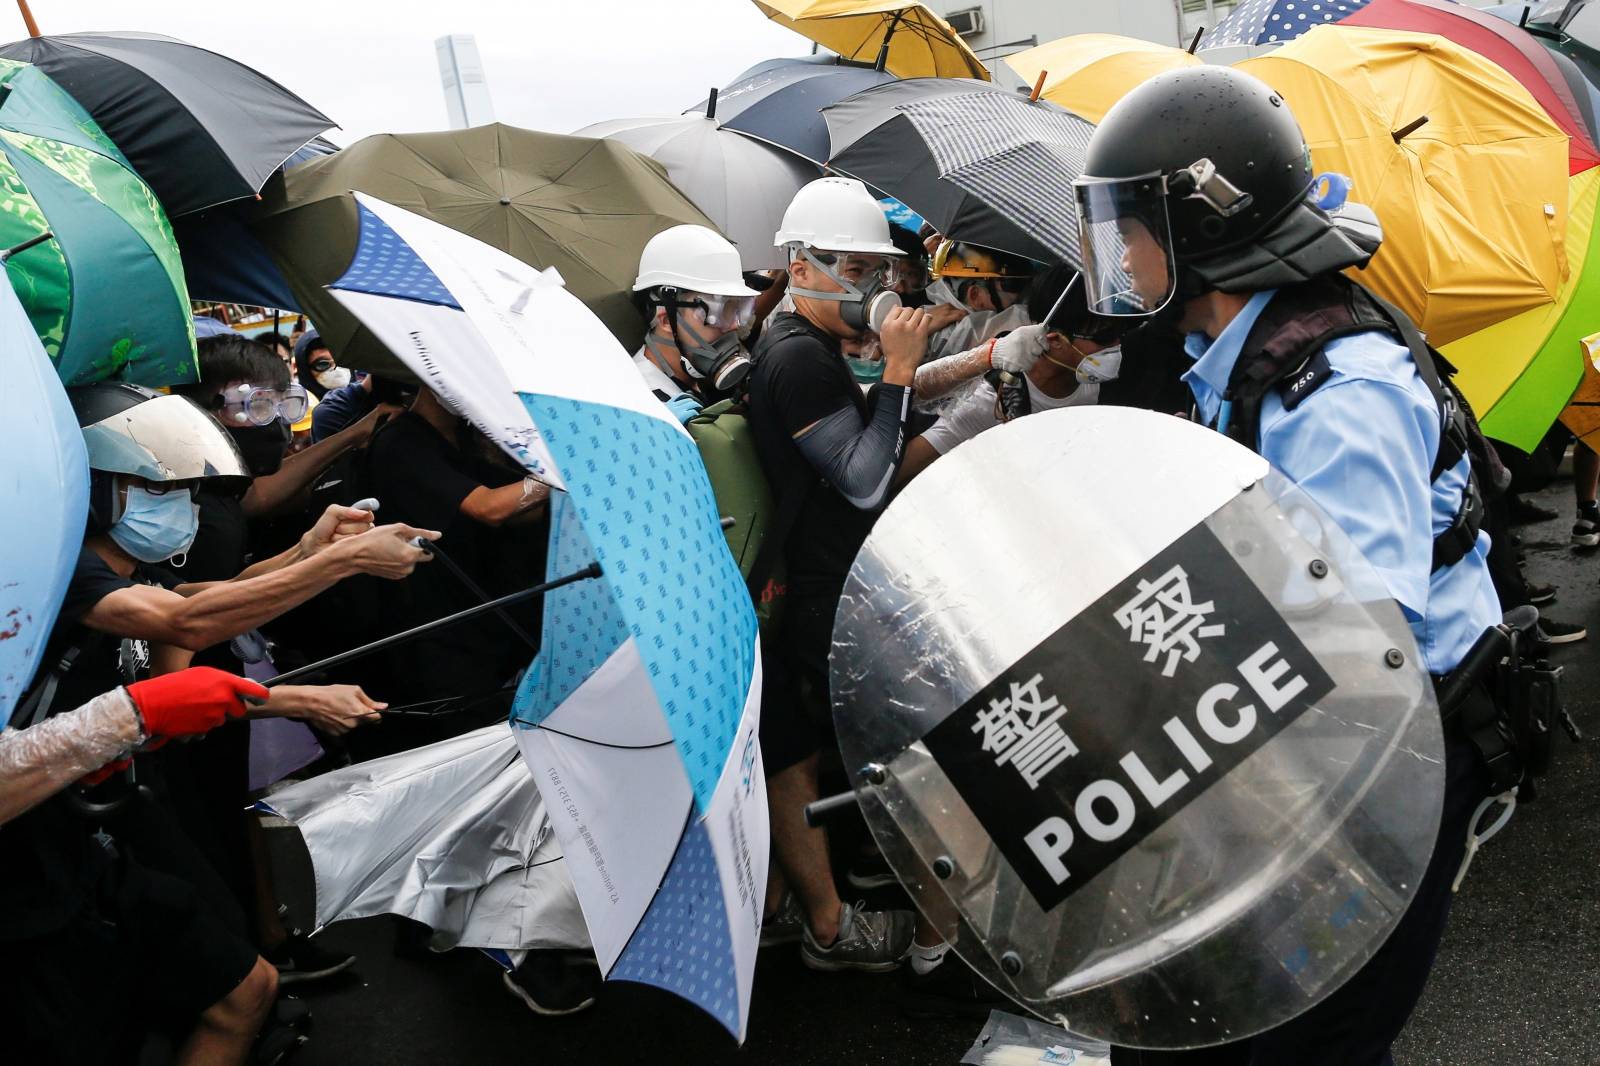 Police try to disperse protesters near a flag raising ceremony for the anniversary of Hong Kong handover to China in Hong Kong